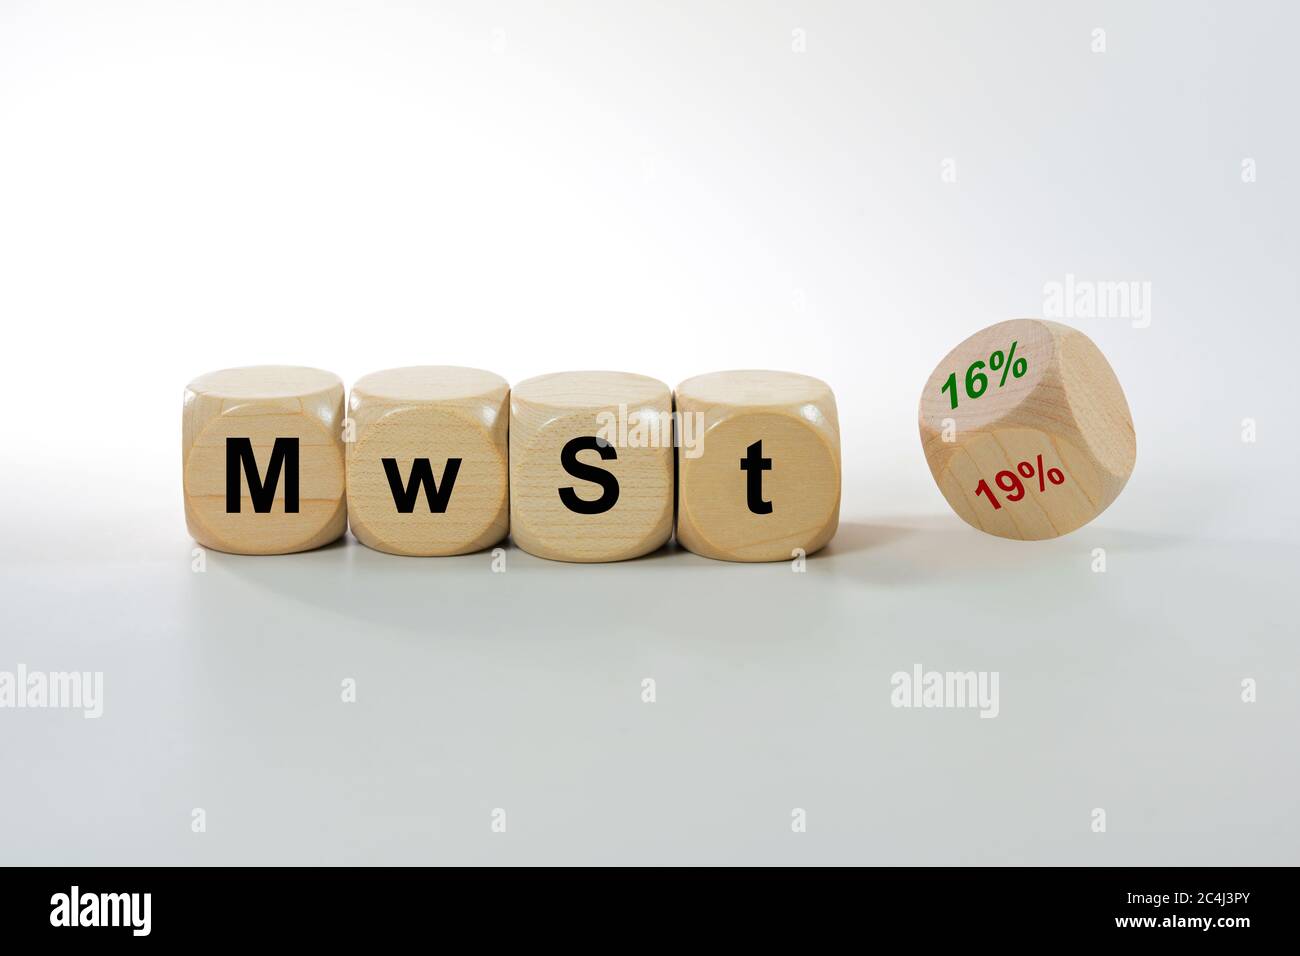 German economic stimulus package after the corona crisis lowers costs, MwSt (value added tax) written on wooden cubes, one dice turns from 19% to 16%, Stock Photo